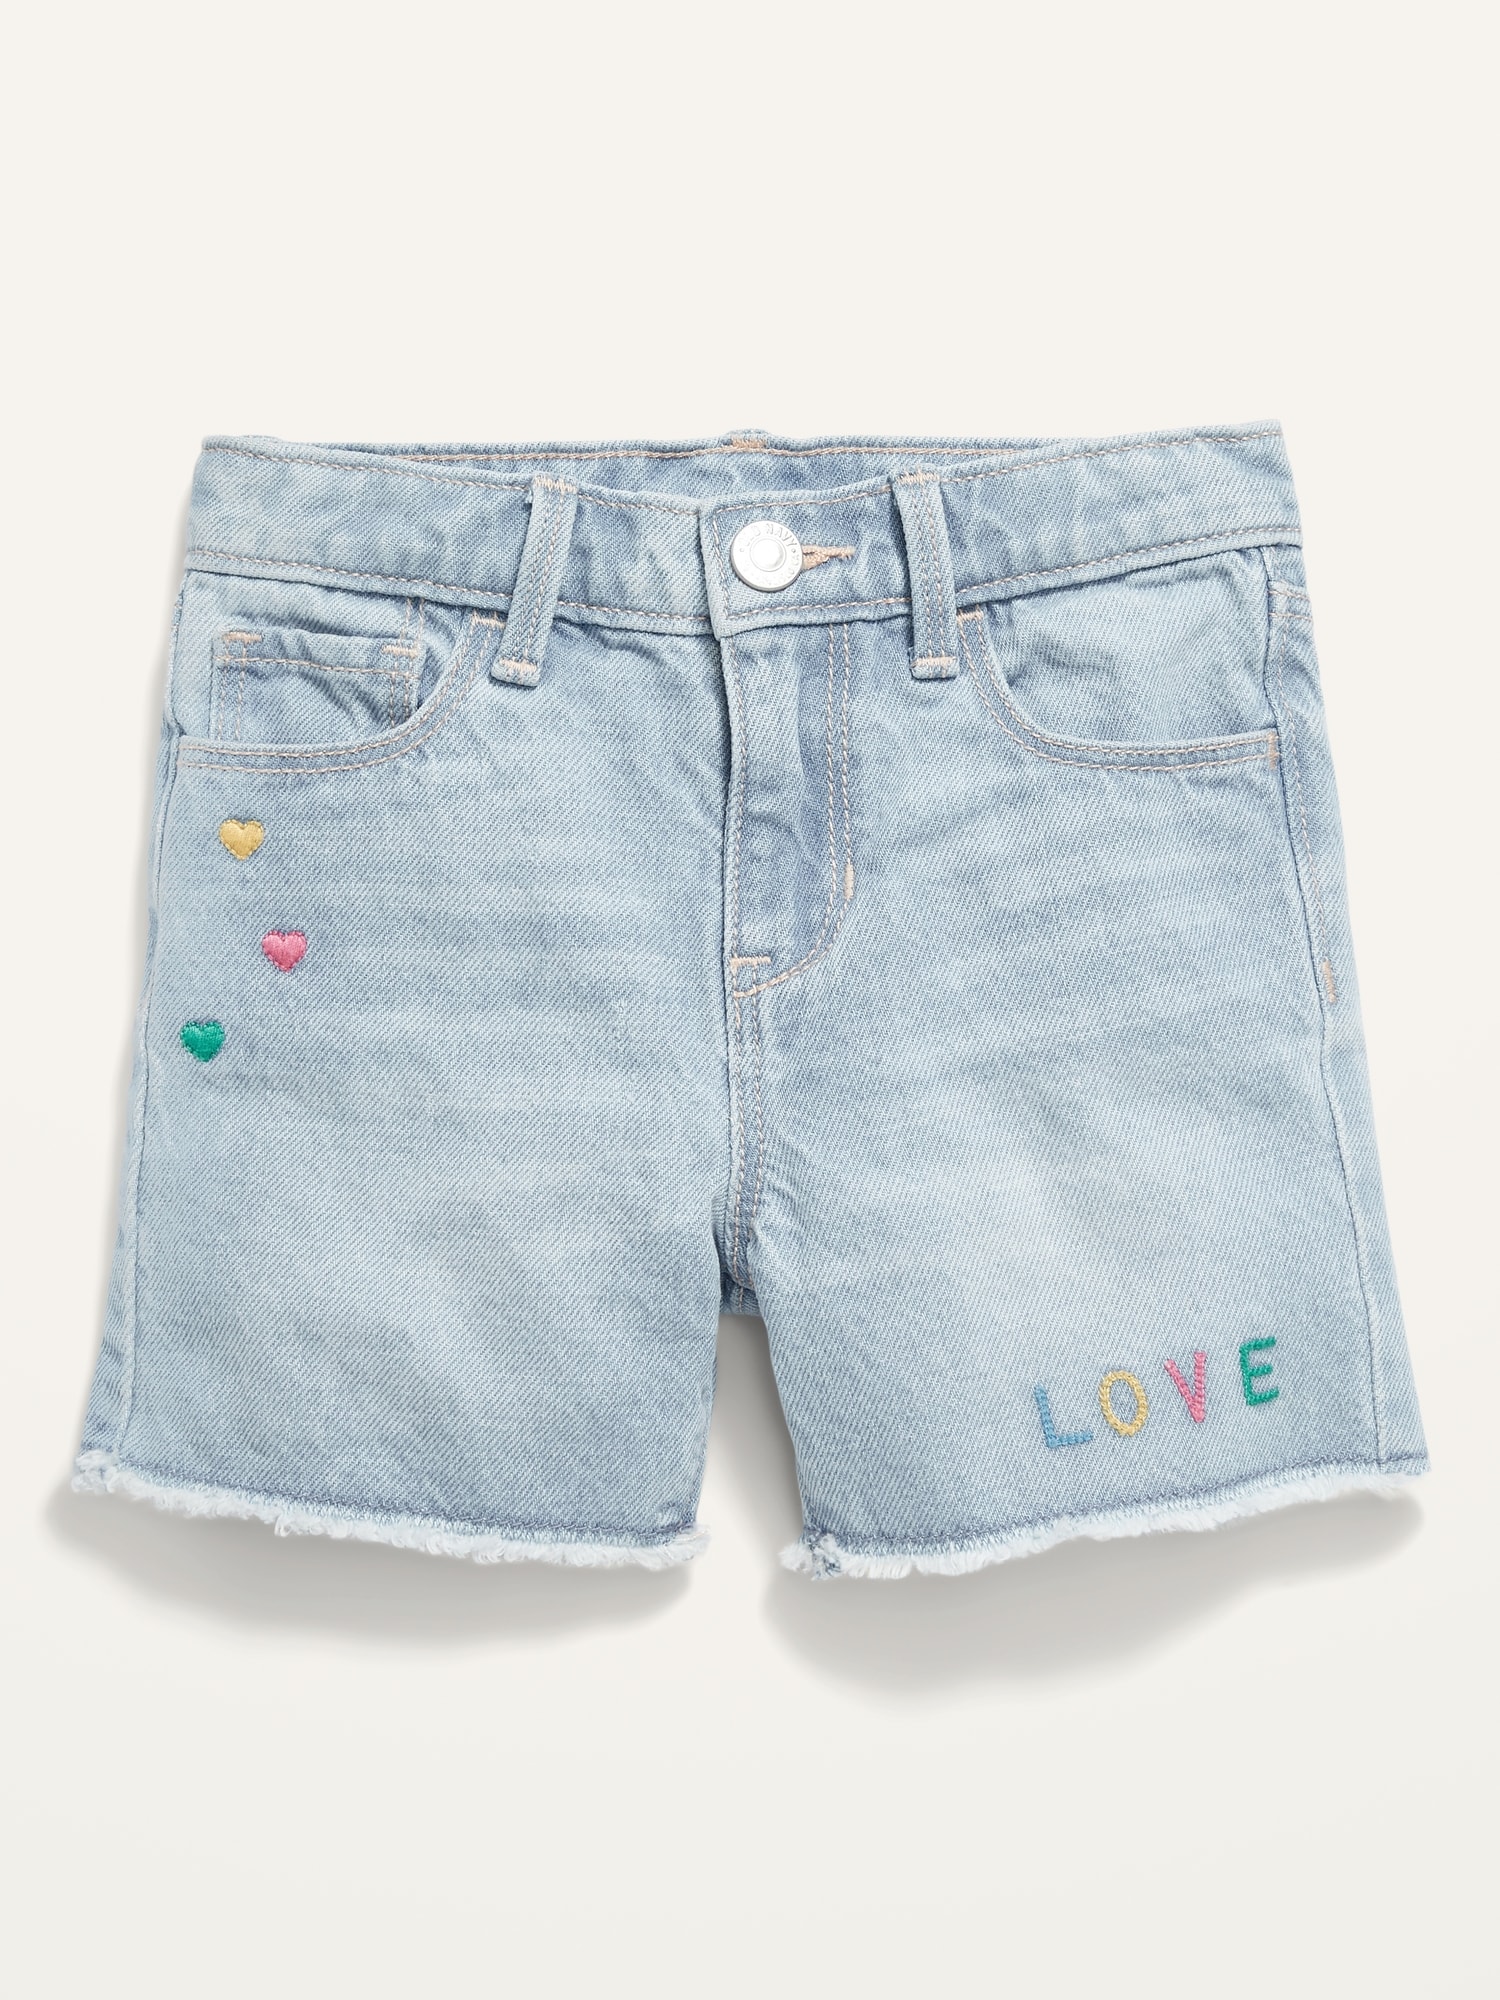 Buy Better With Age Gentleman's Denim Shorts Online at UNION LOS ANGELES